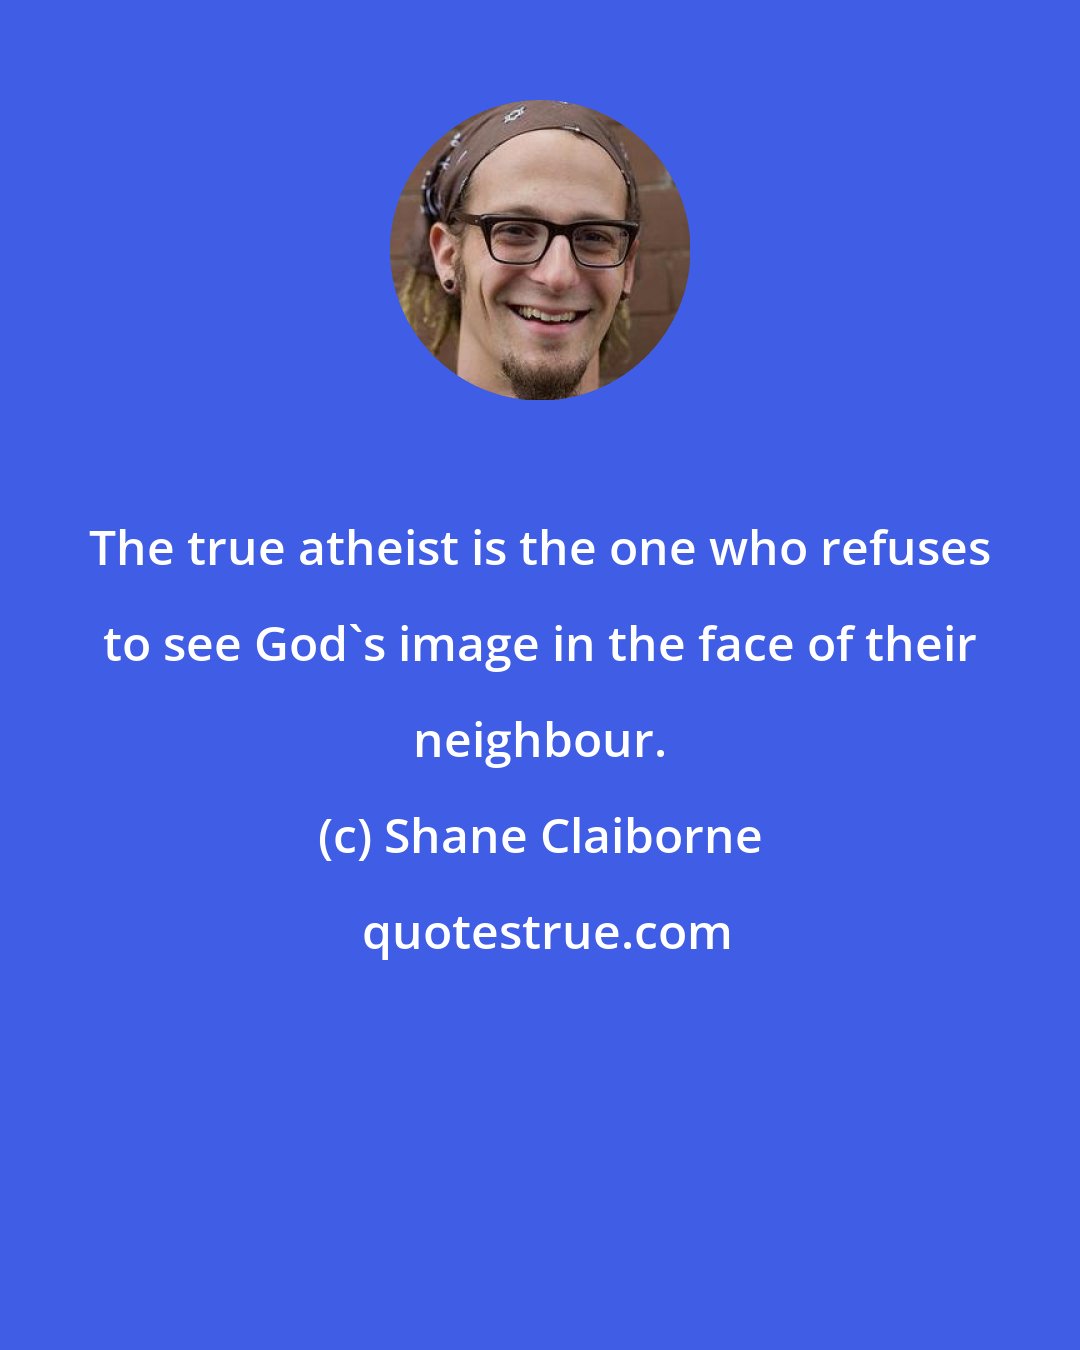 Shane Claiborne: The true atheist is the one who refuses to see God's image in the face of their neighbour.